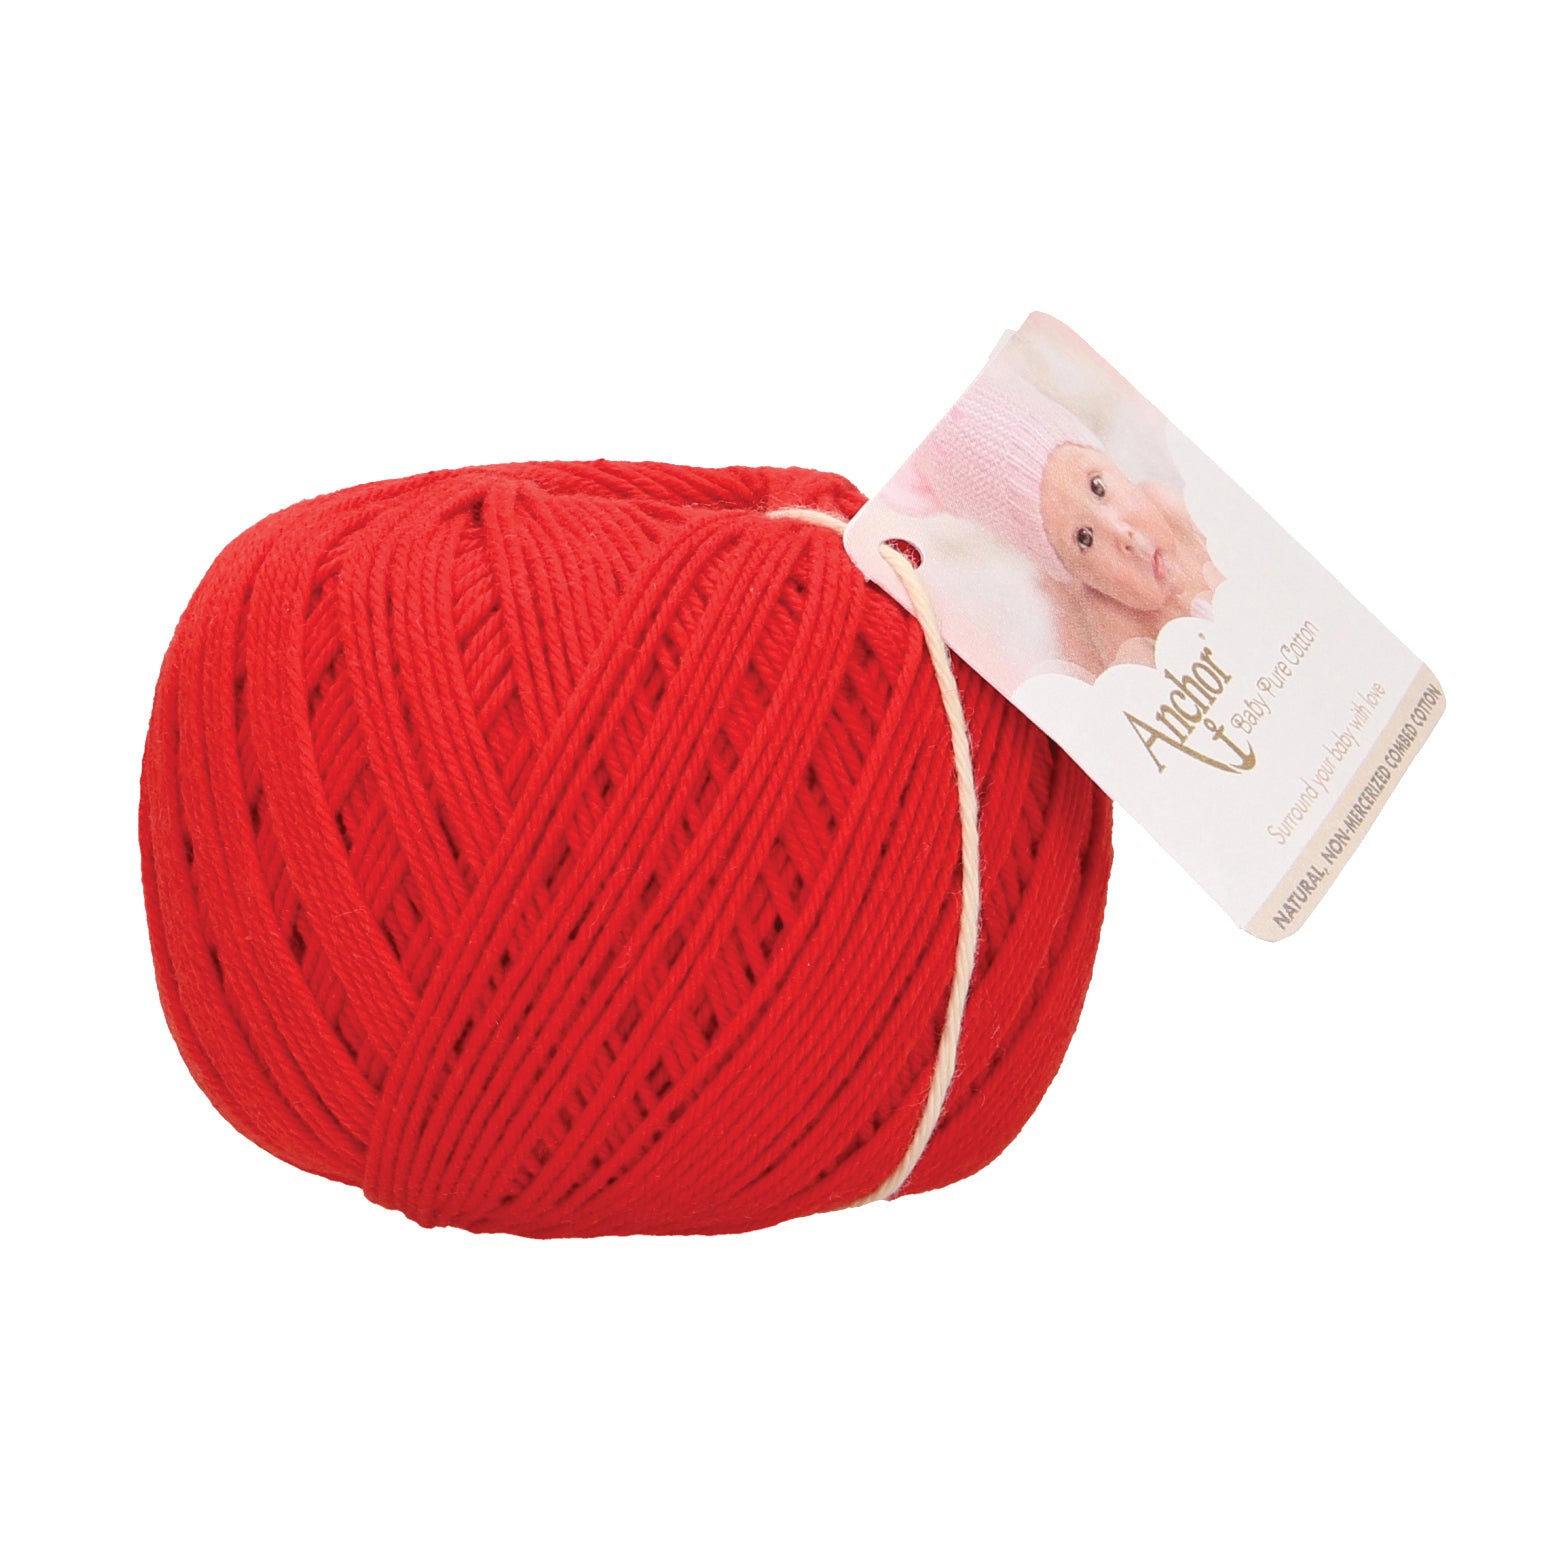 Anchor Baby Pure Cotton 4 ply Yarn 0115